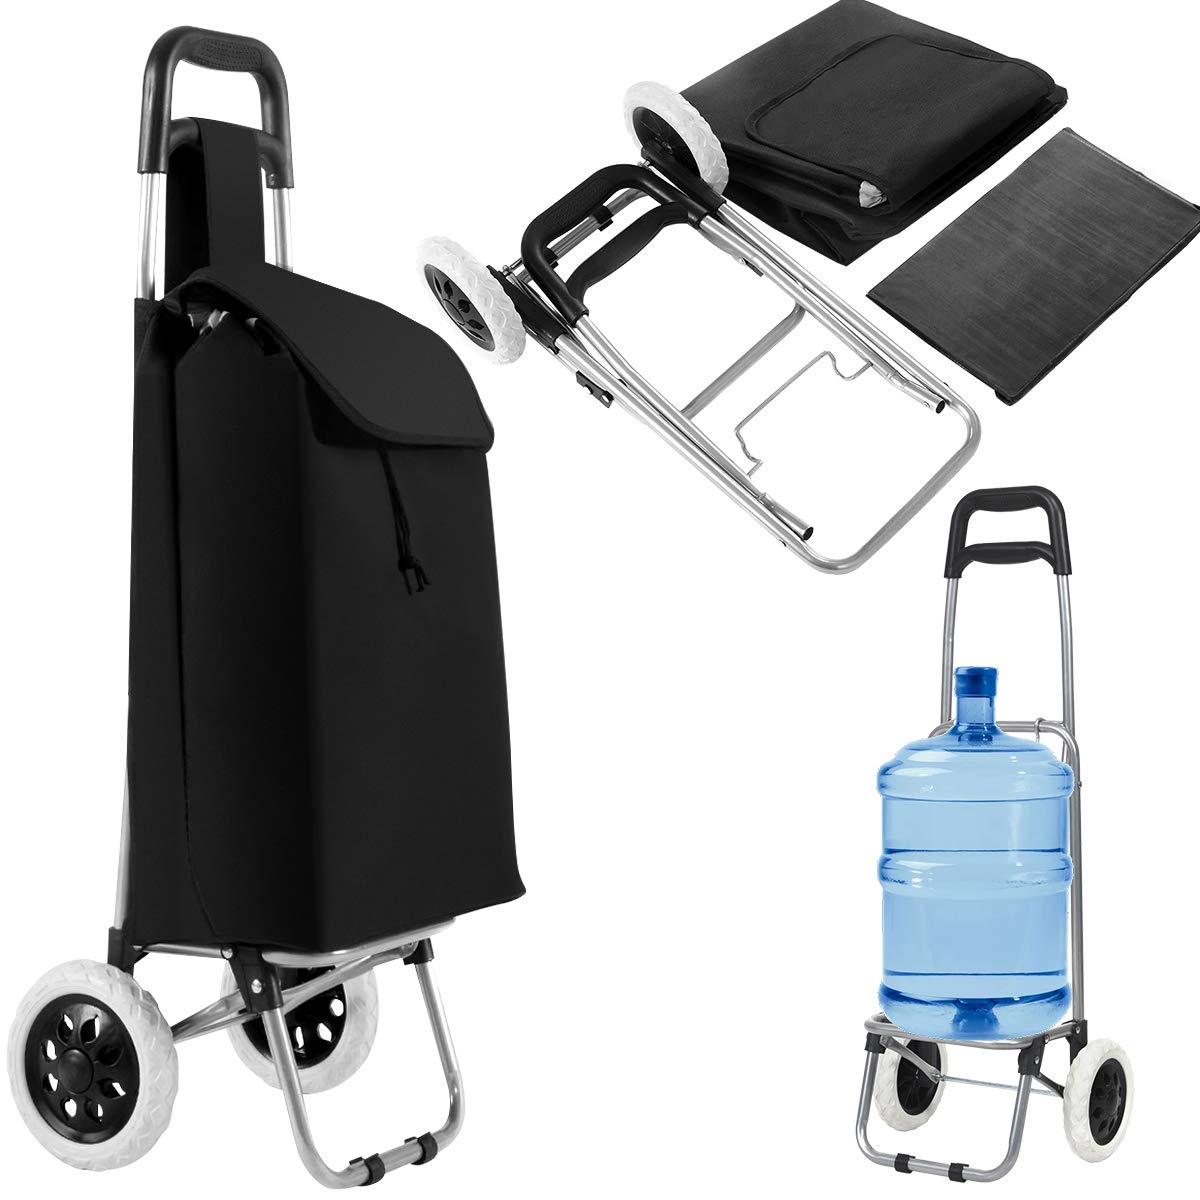 Shopping Trolley Bag With Chair Folding| Alibaba.com